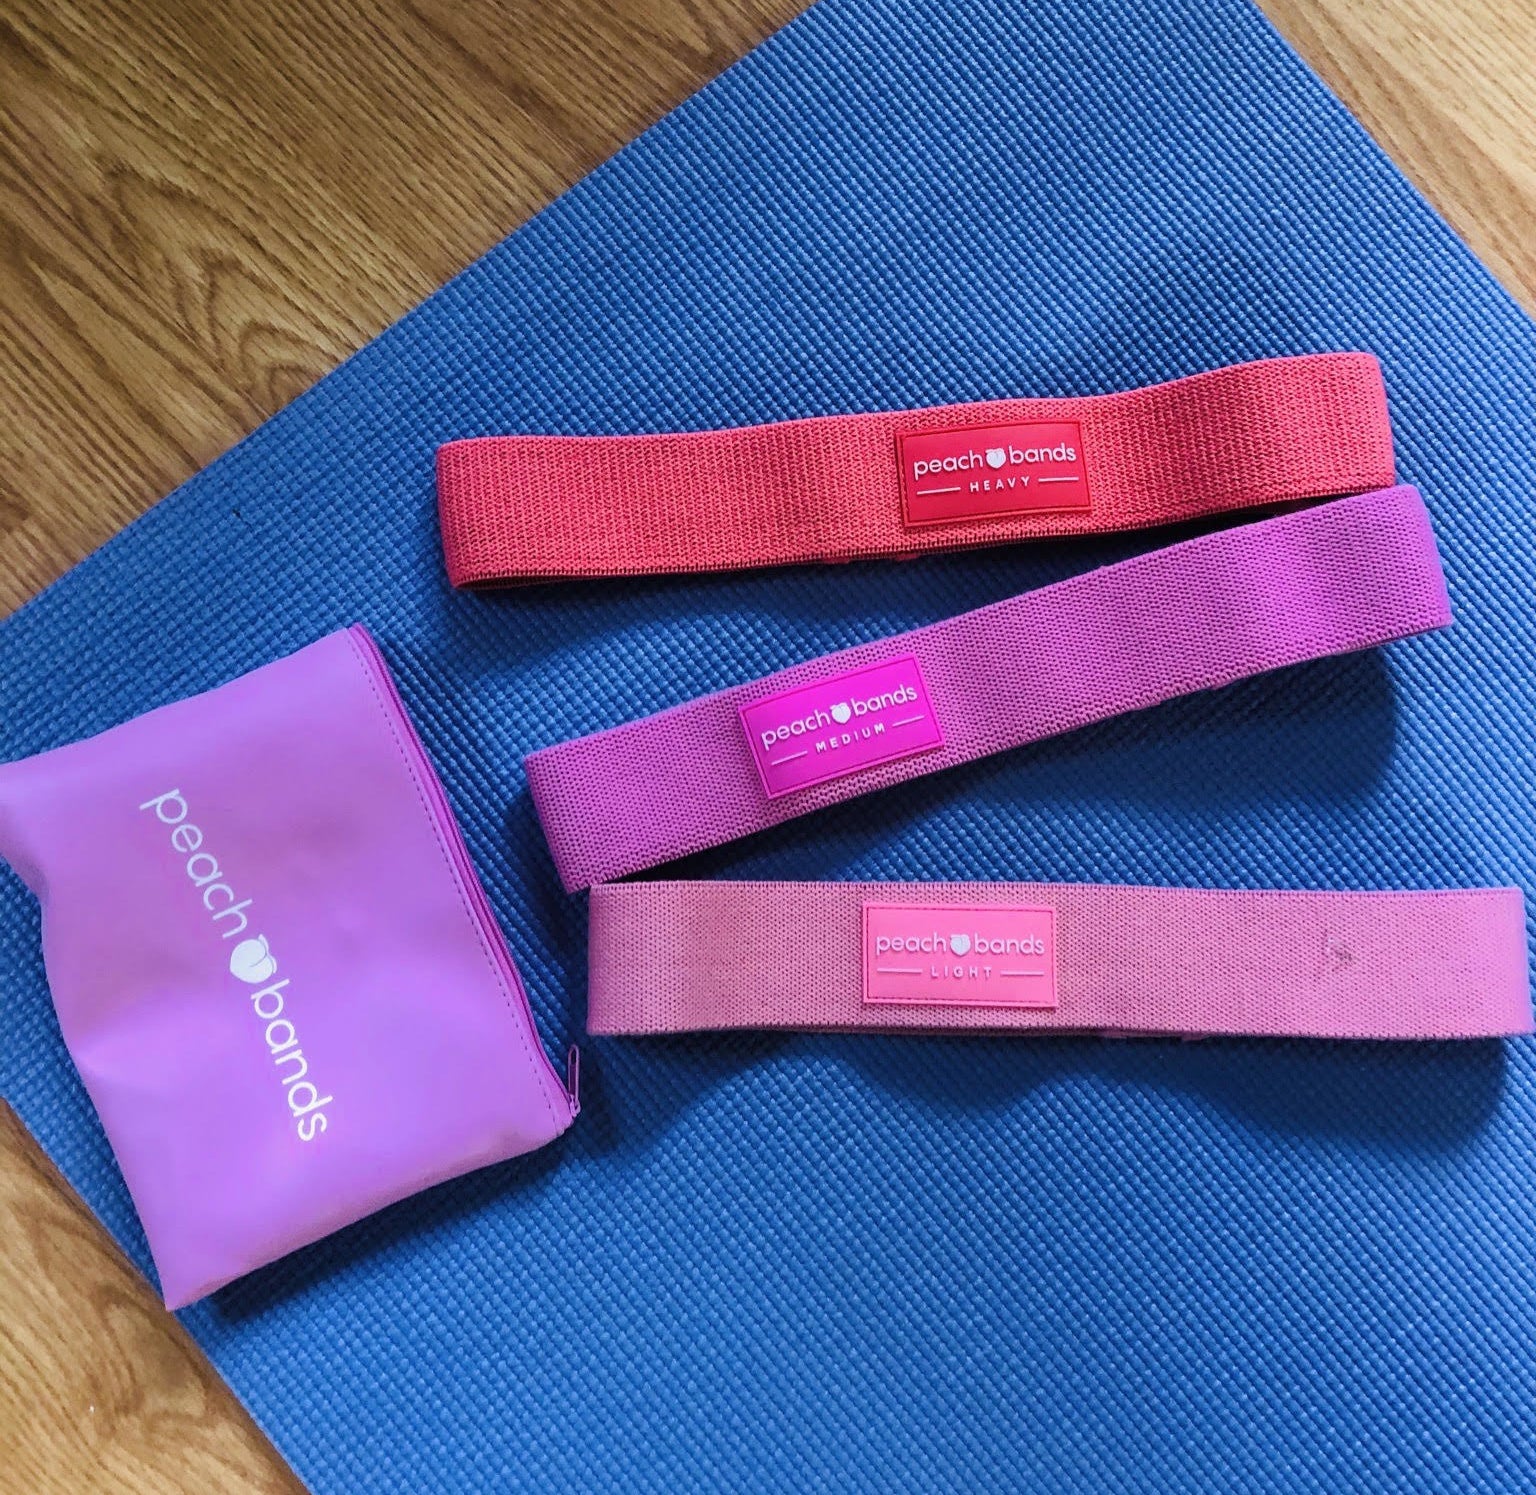 The set of three peach bands lying on a workout mat